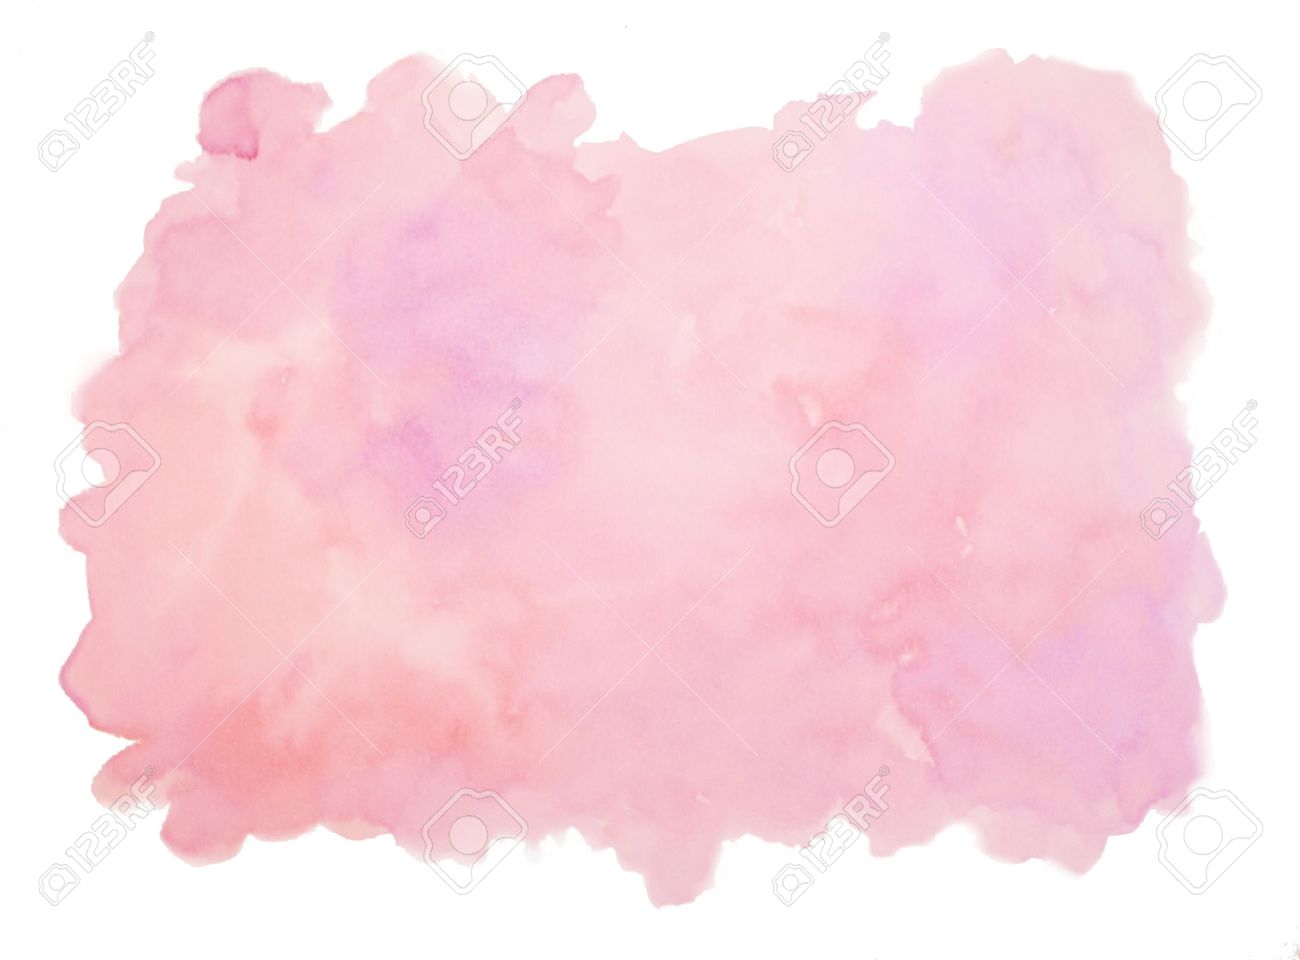 Coral Pink Peach Watercolor Background Texture Stock Photo